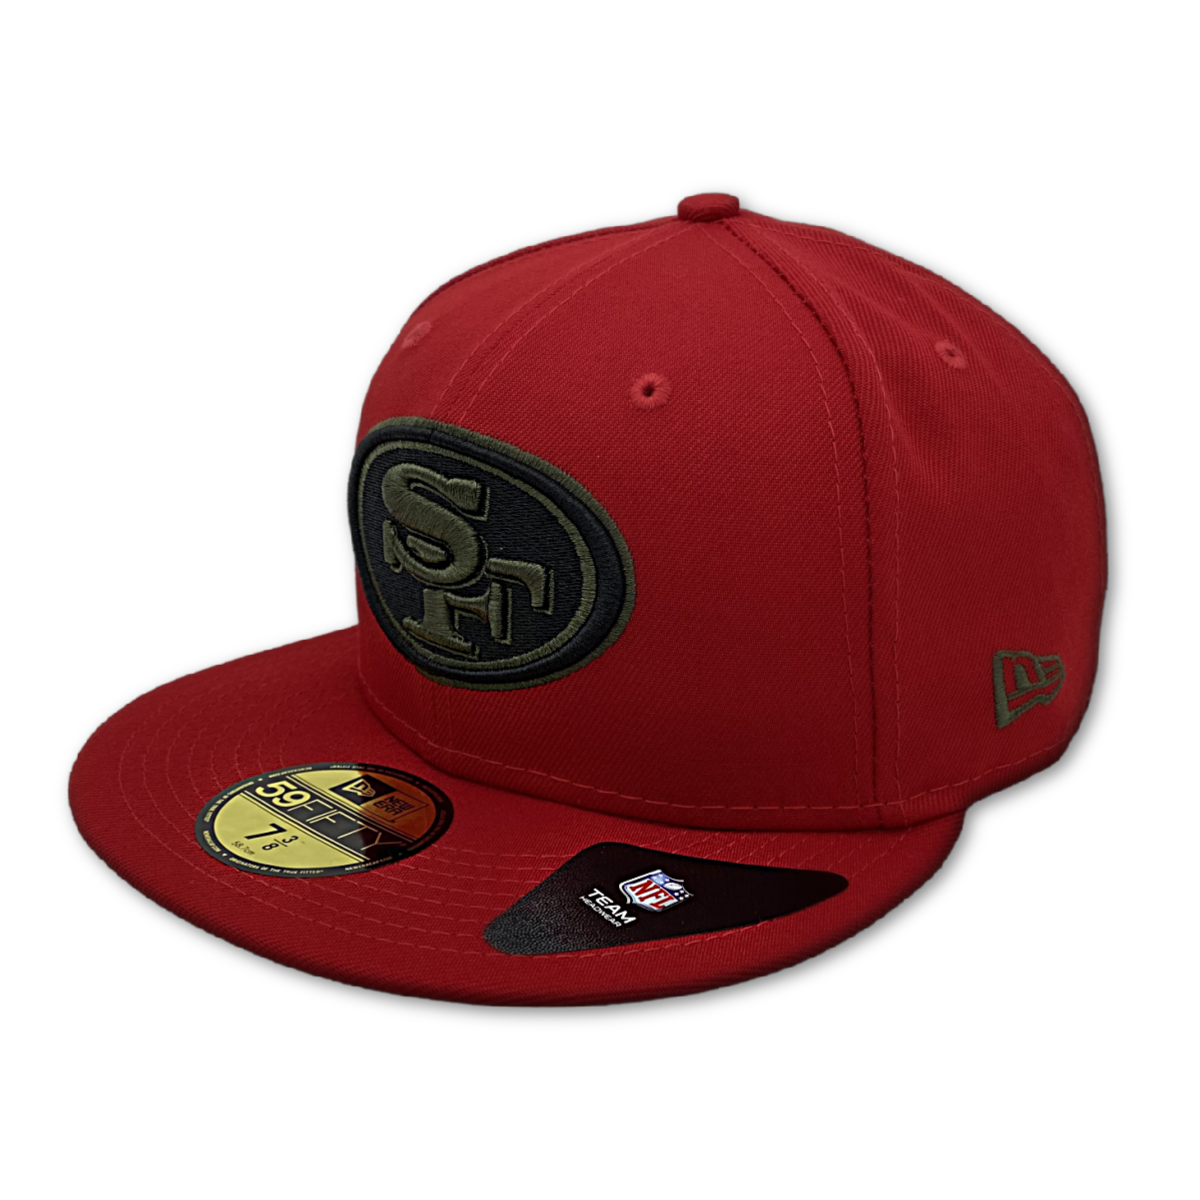 SAN FRANCISCO GIANTS NEW ERA WOOD CAMO 59FIFTY FITTED HAT nvsoccer.com The Coliseum